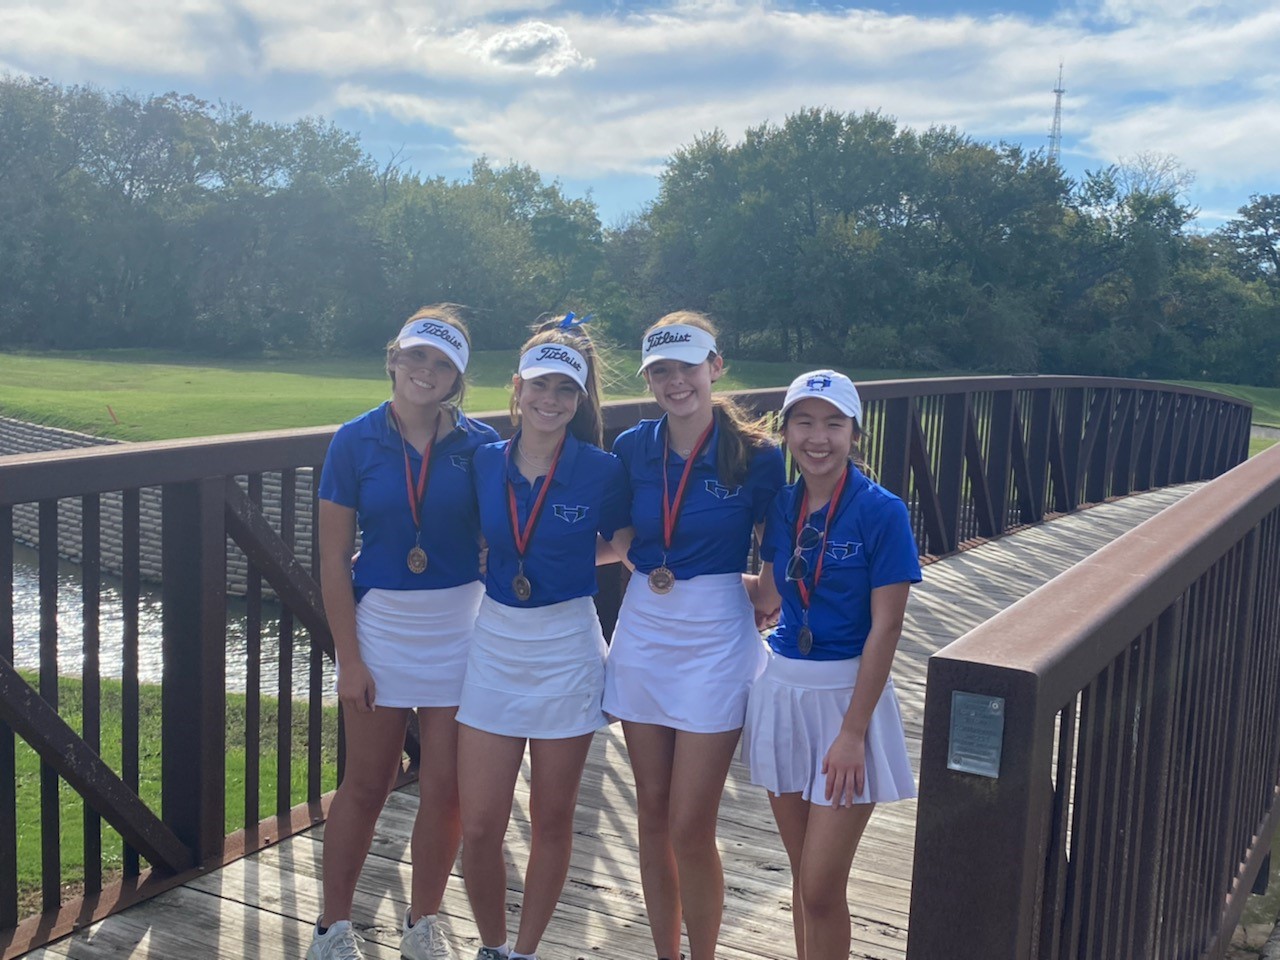 Four Girls in Blue and White With Medals